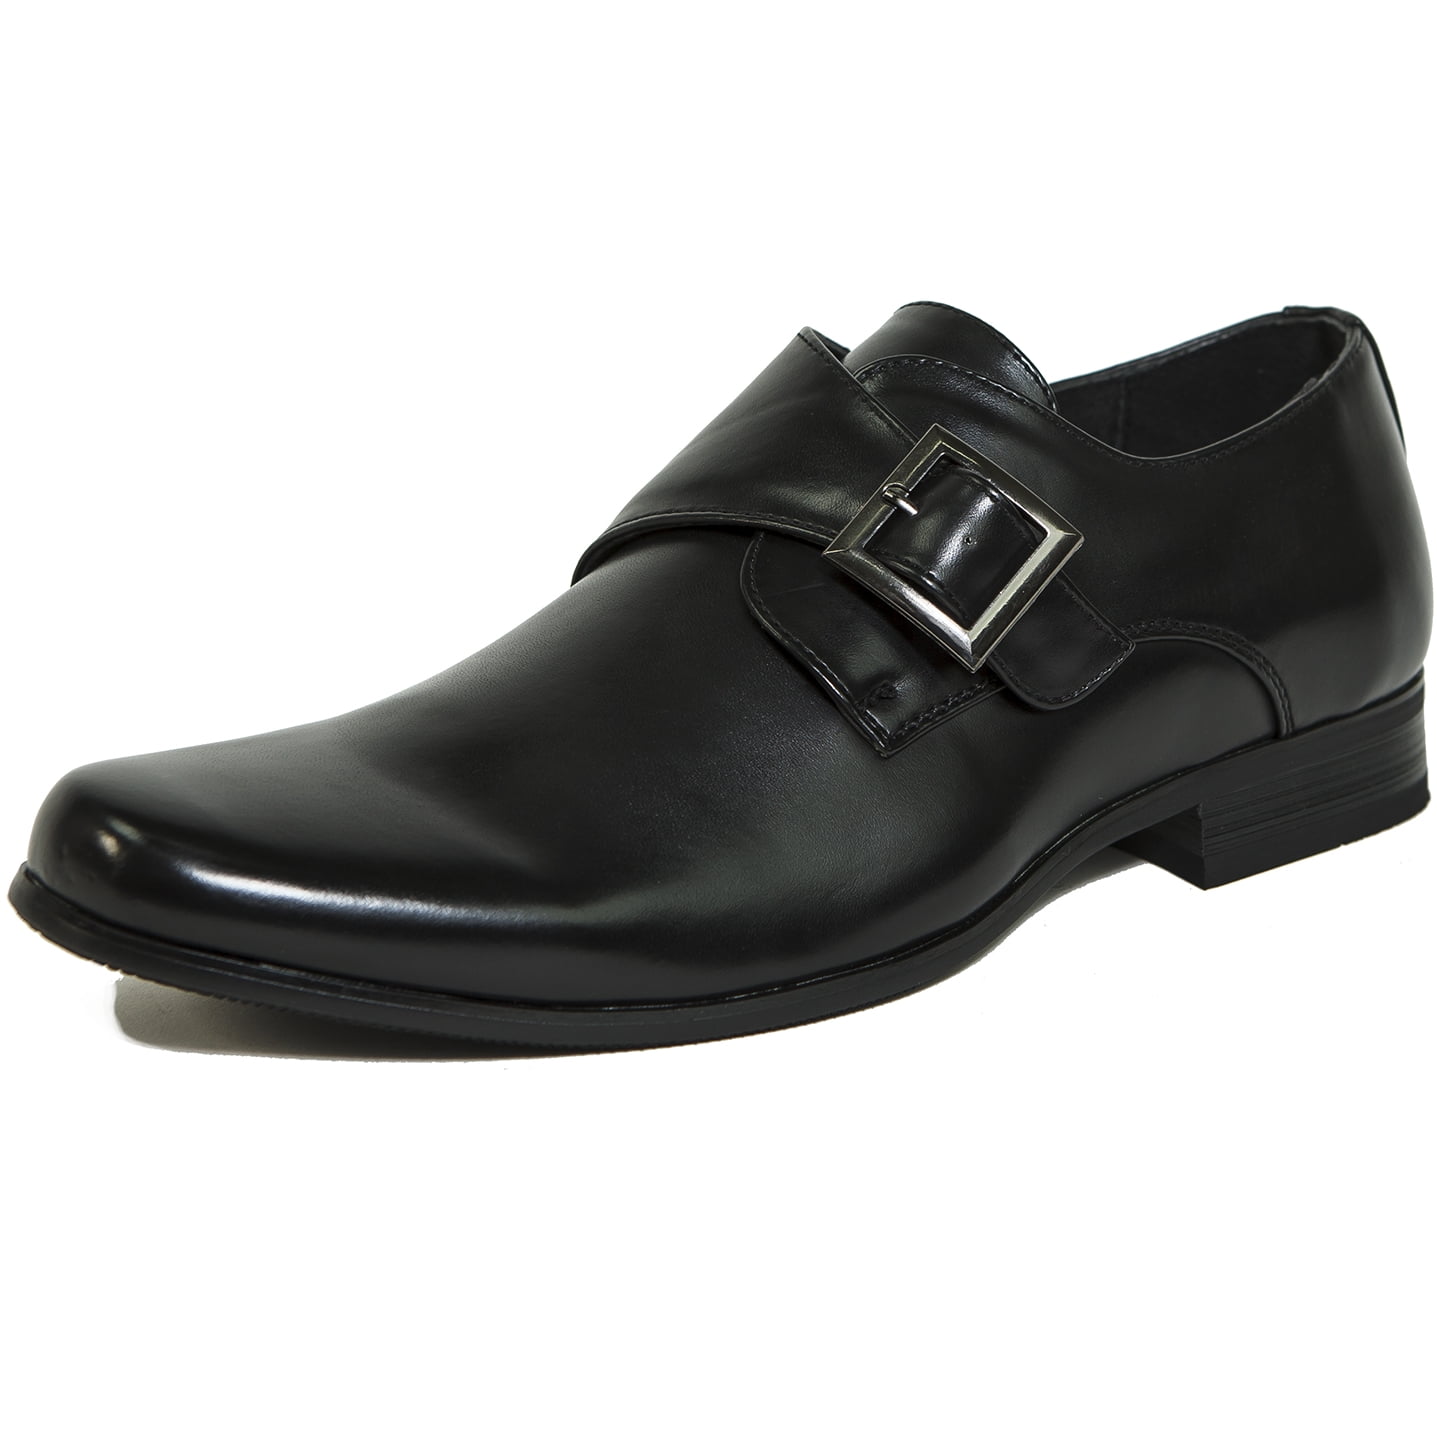 mens leather shoes with buckles